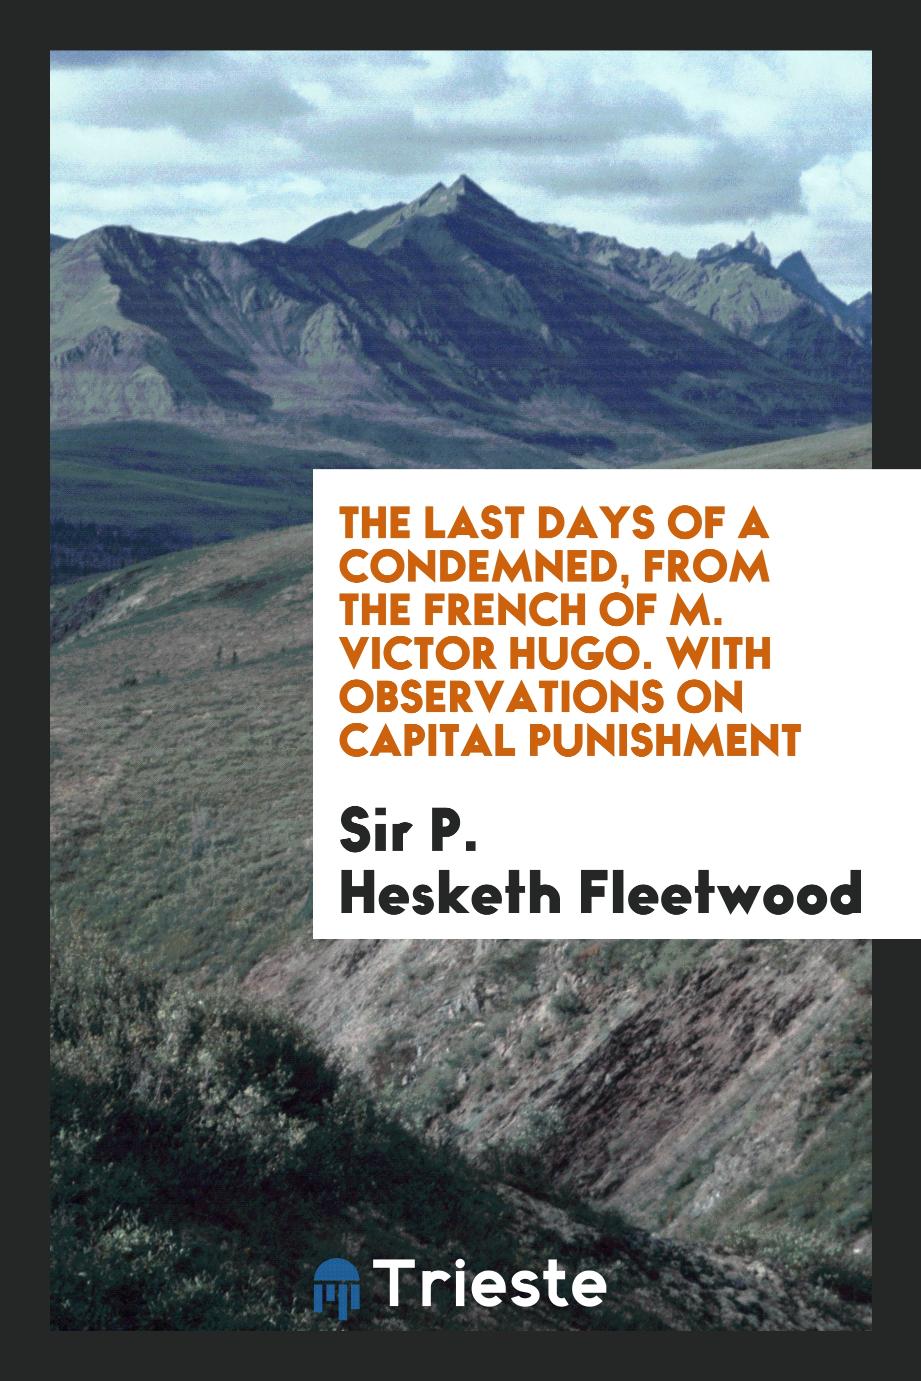 The Last Days of a Condemned, from the French of M. Victor Hugo. With Observations on Capital Punishment